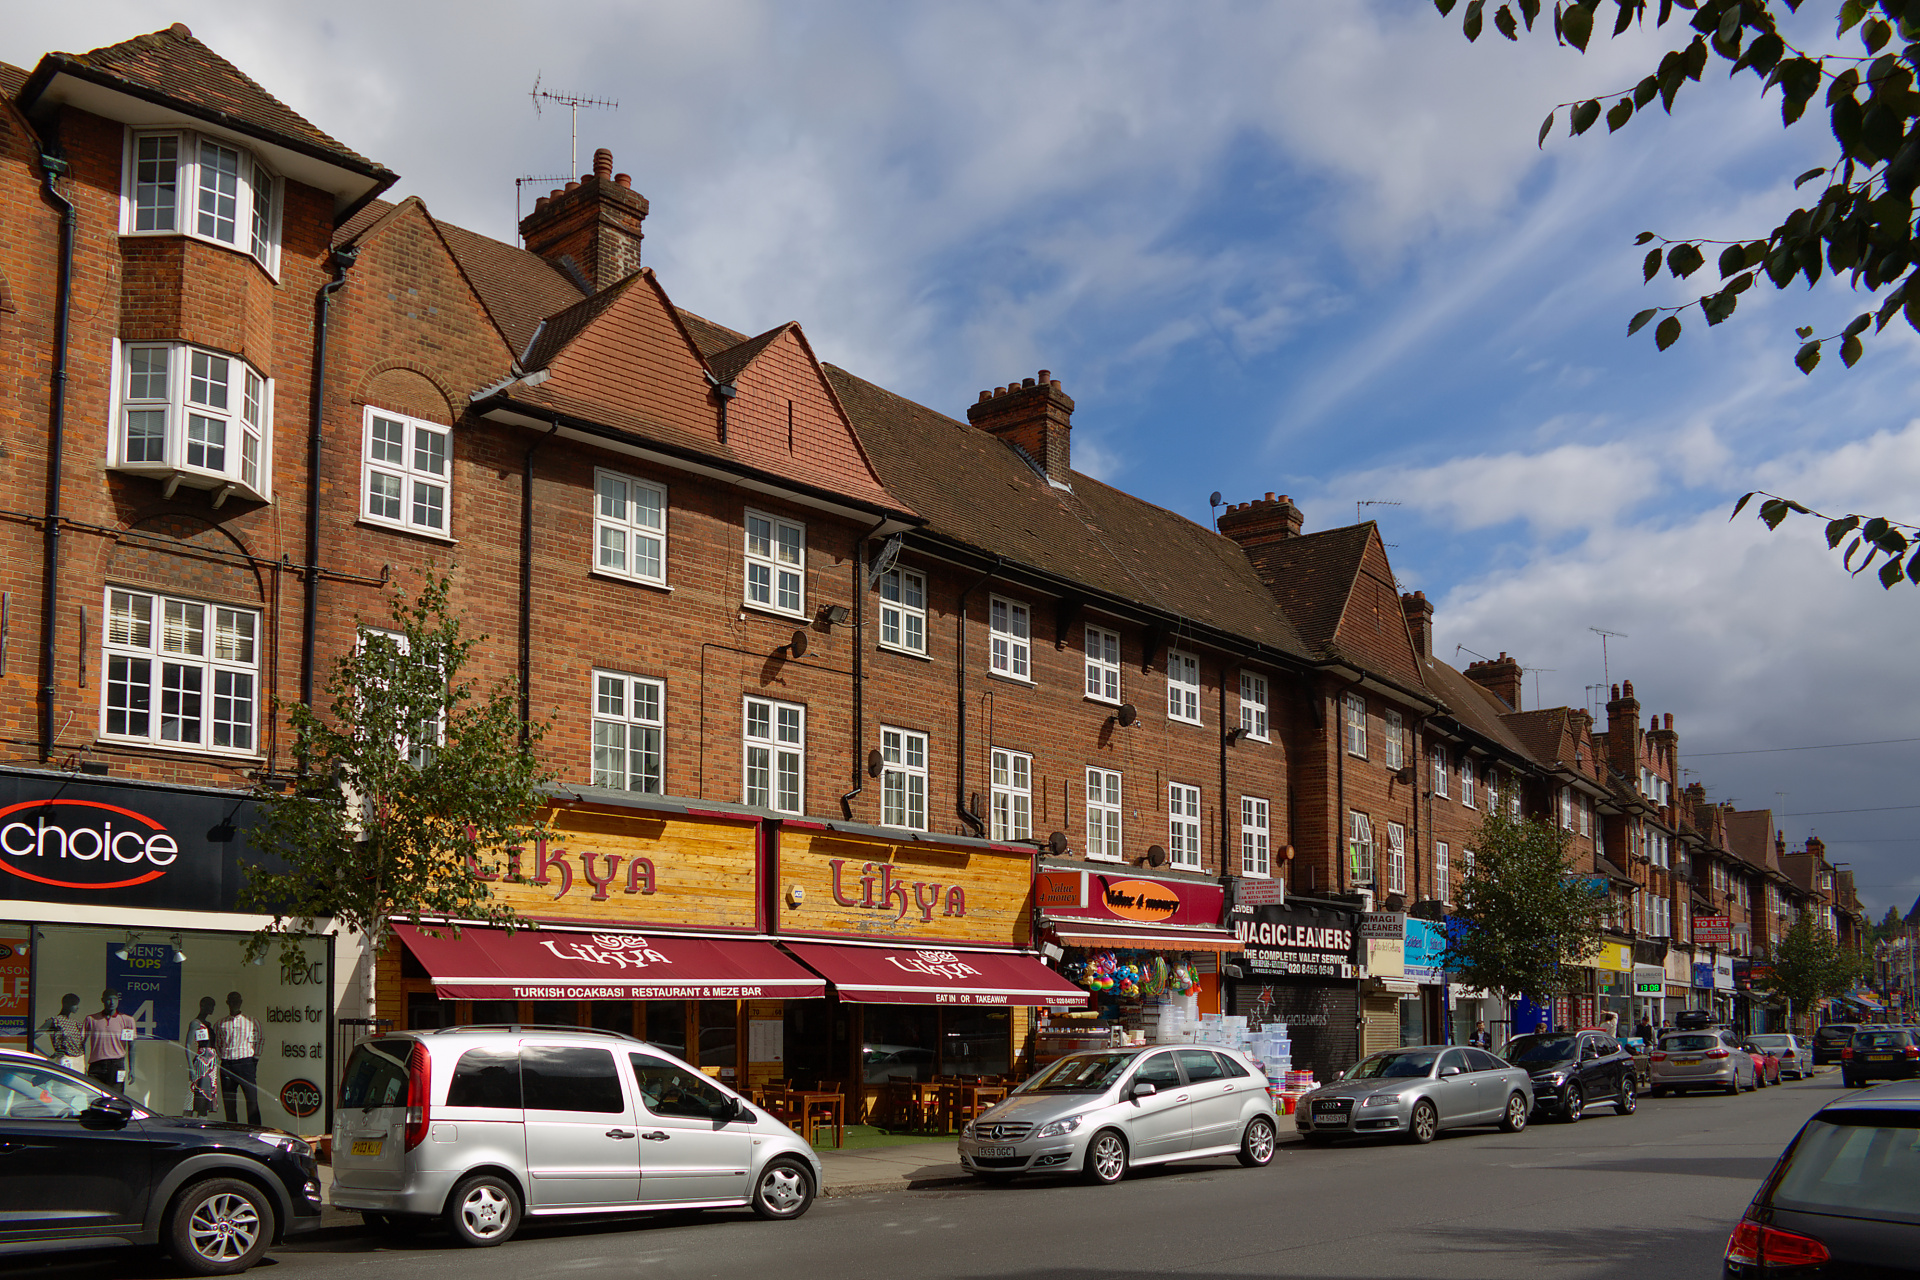 Golders Green (Travels » London » London at Day)